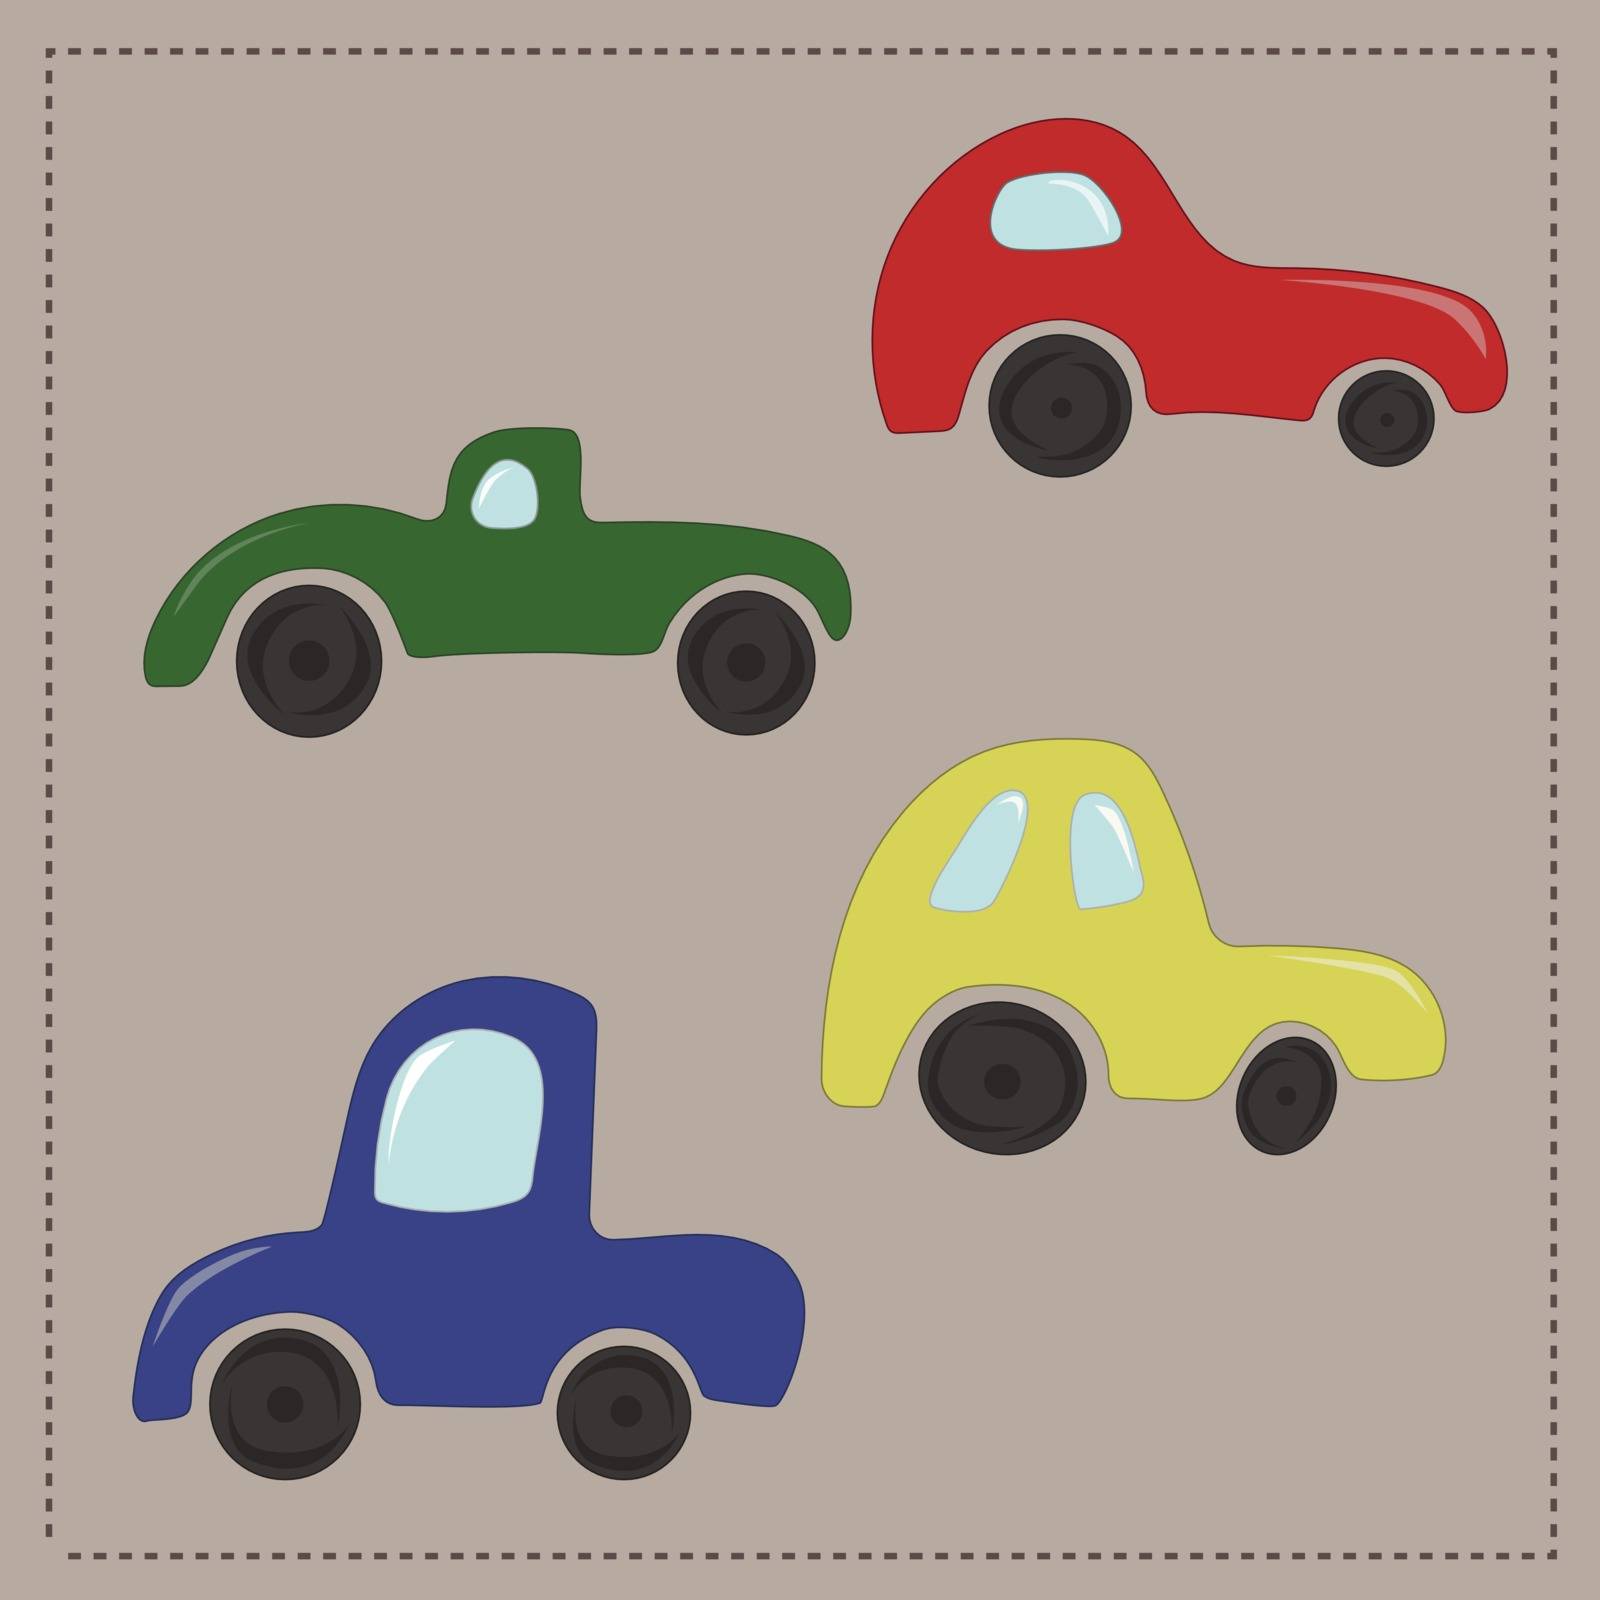 Childrens colorful cartoon cars on brown background